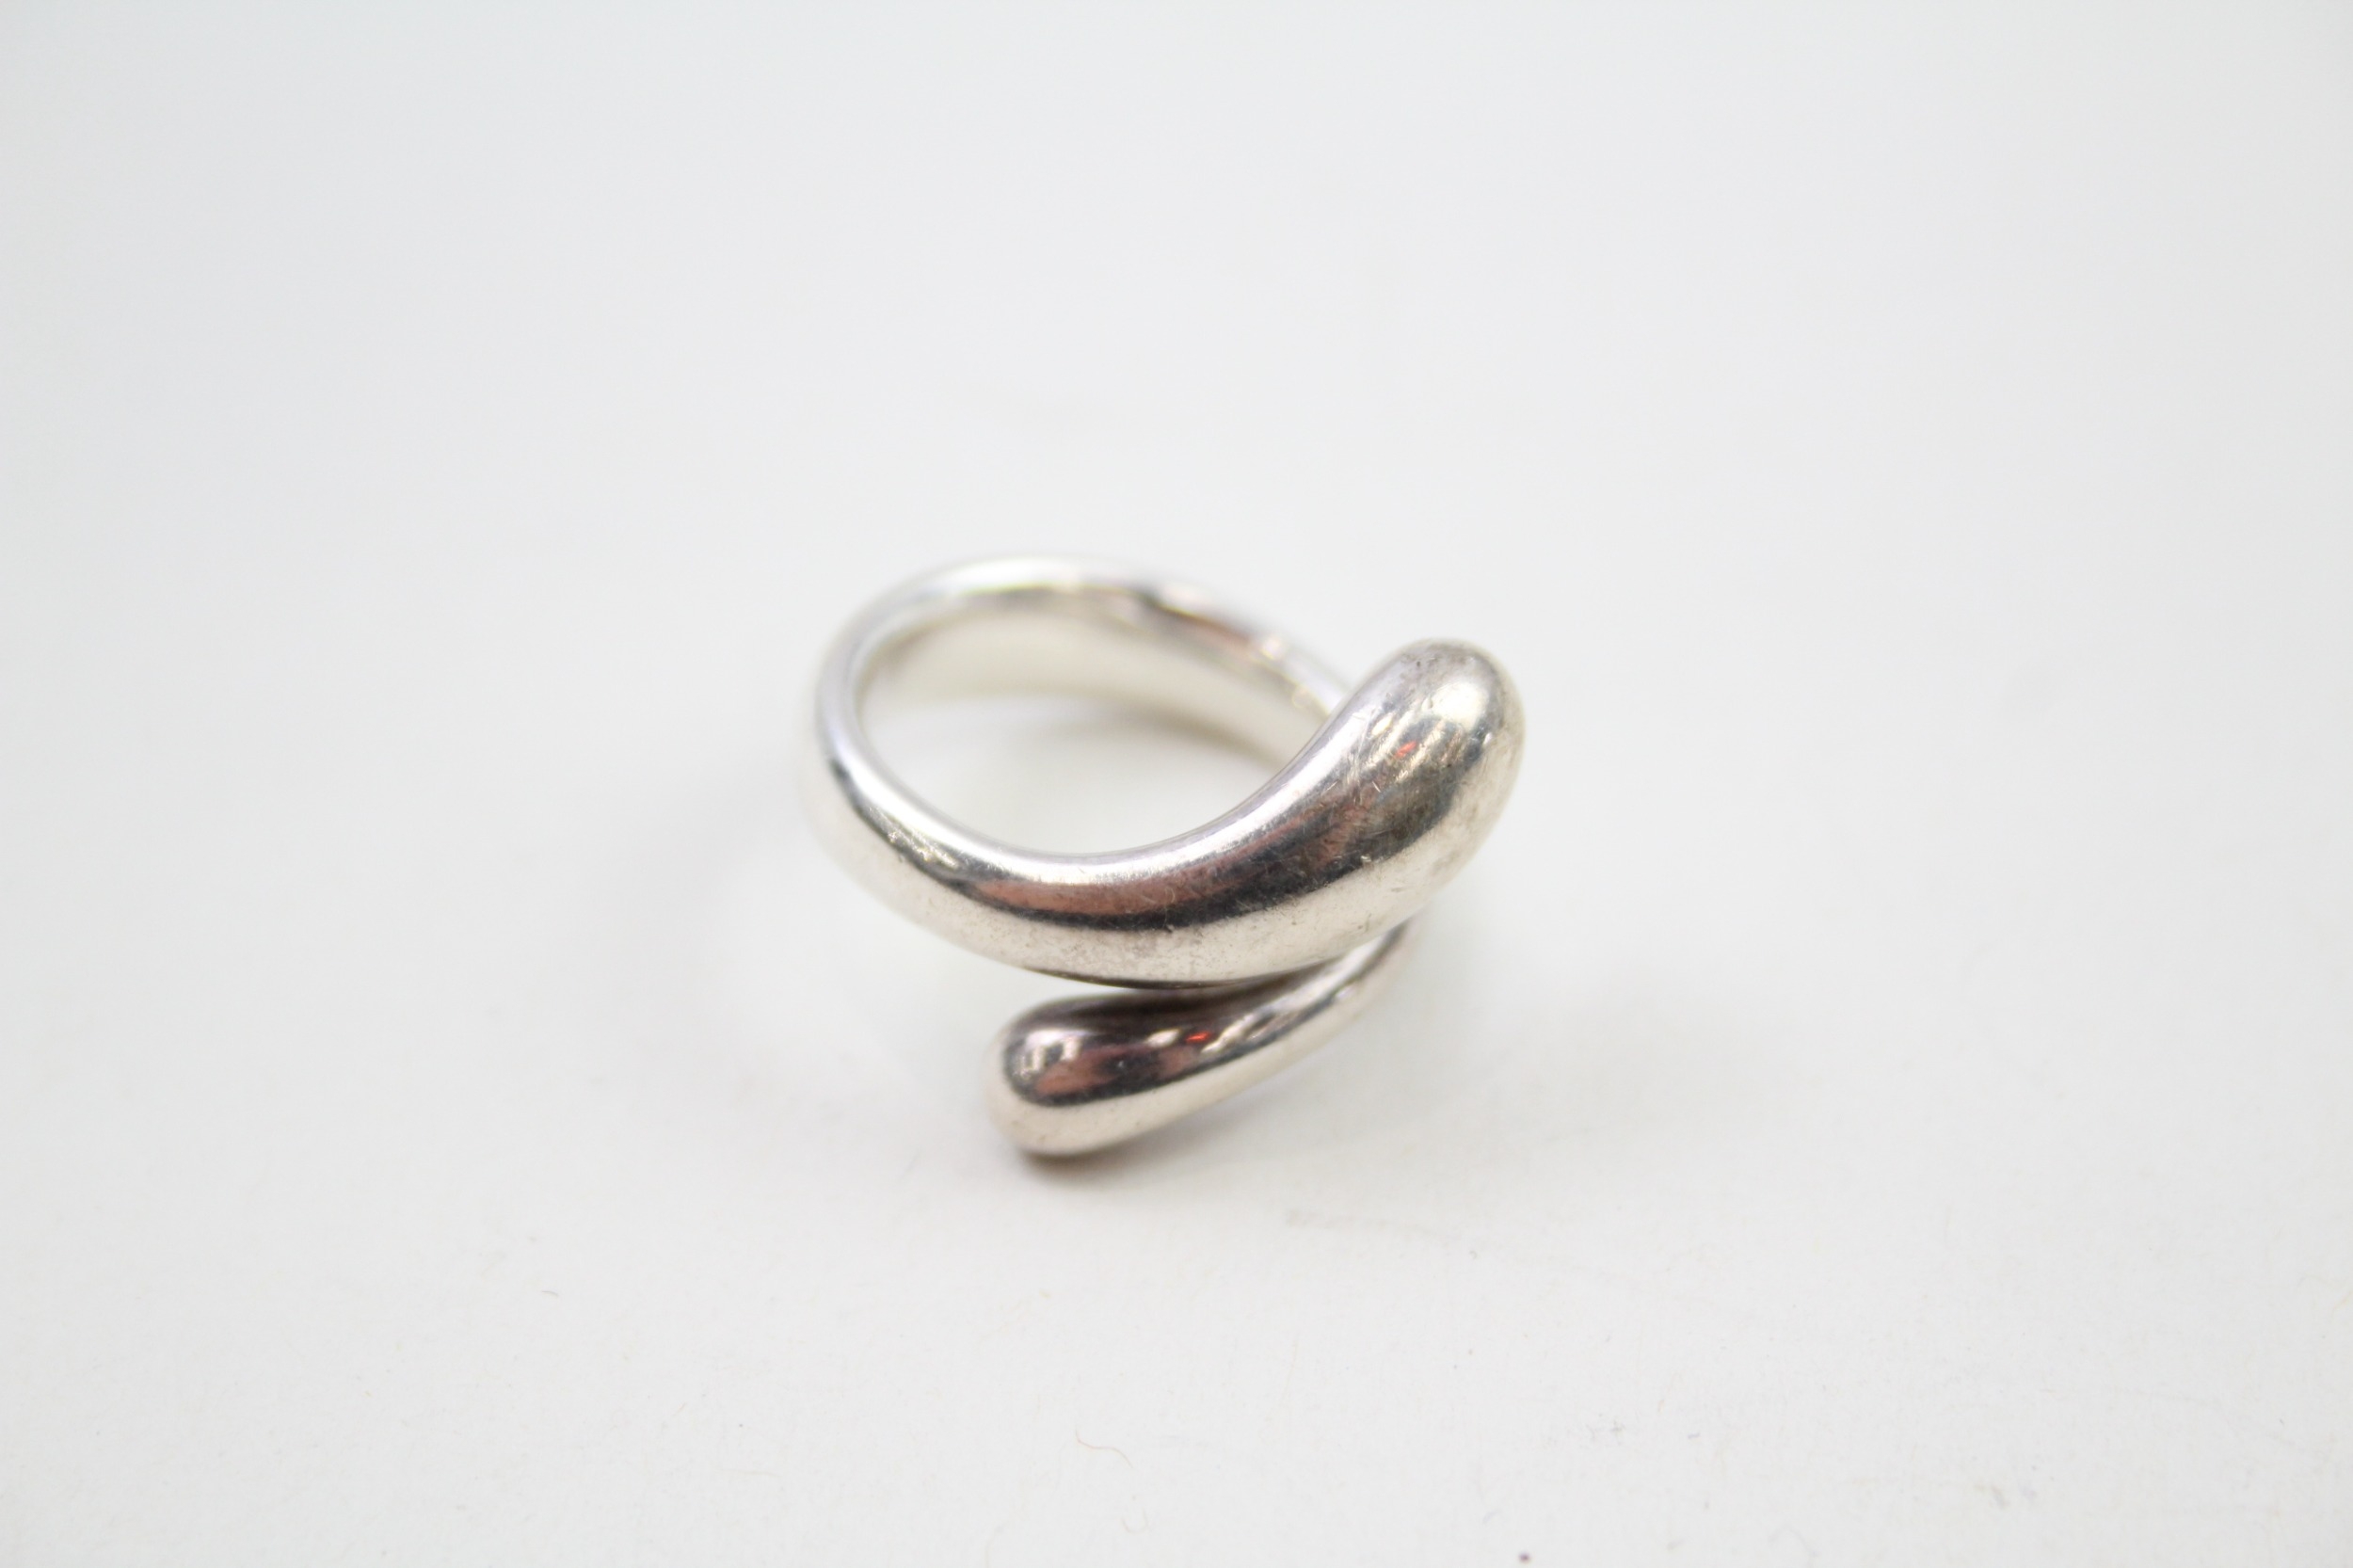 Silver ring by Elsa Peretti for designer Tiffany & Co (10g) - Image 4 of 4